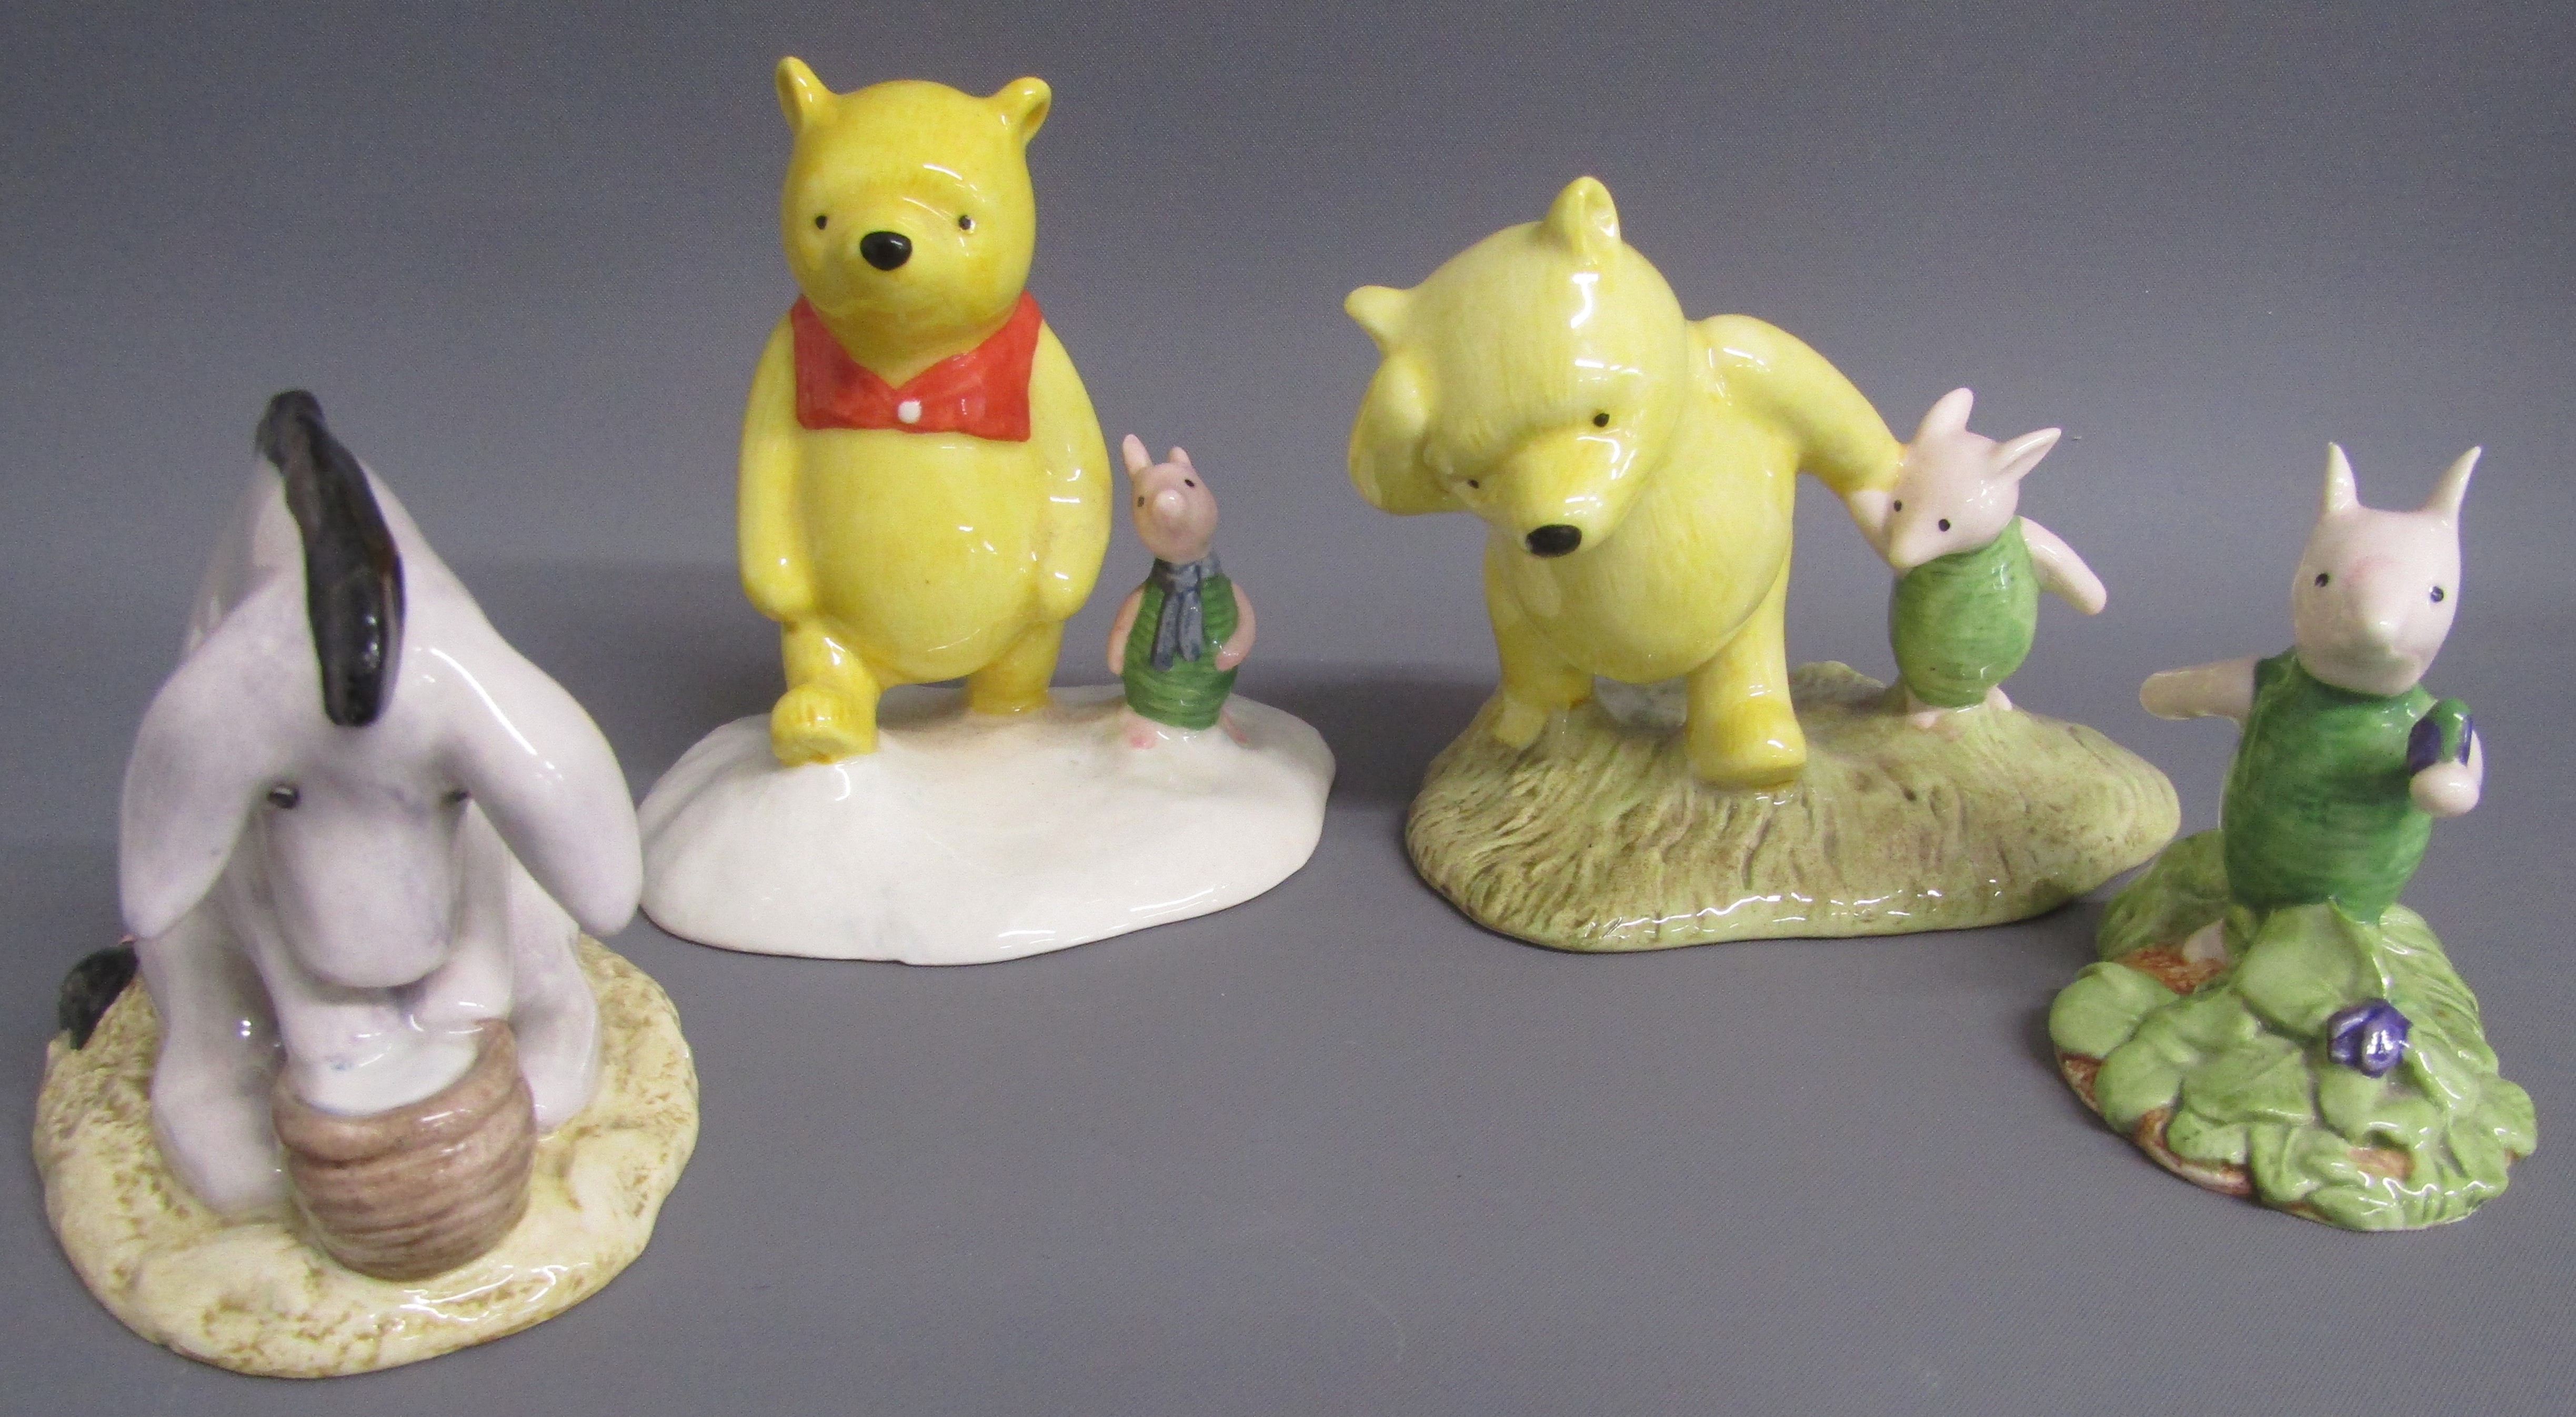 Royal Doulton Winnie the Pooh figures, 'The more it snows, tiddley pom' - 'The Windy Day' - Eeyore - Image 2 of 8